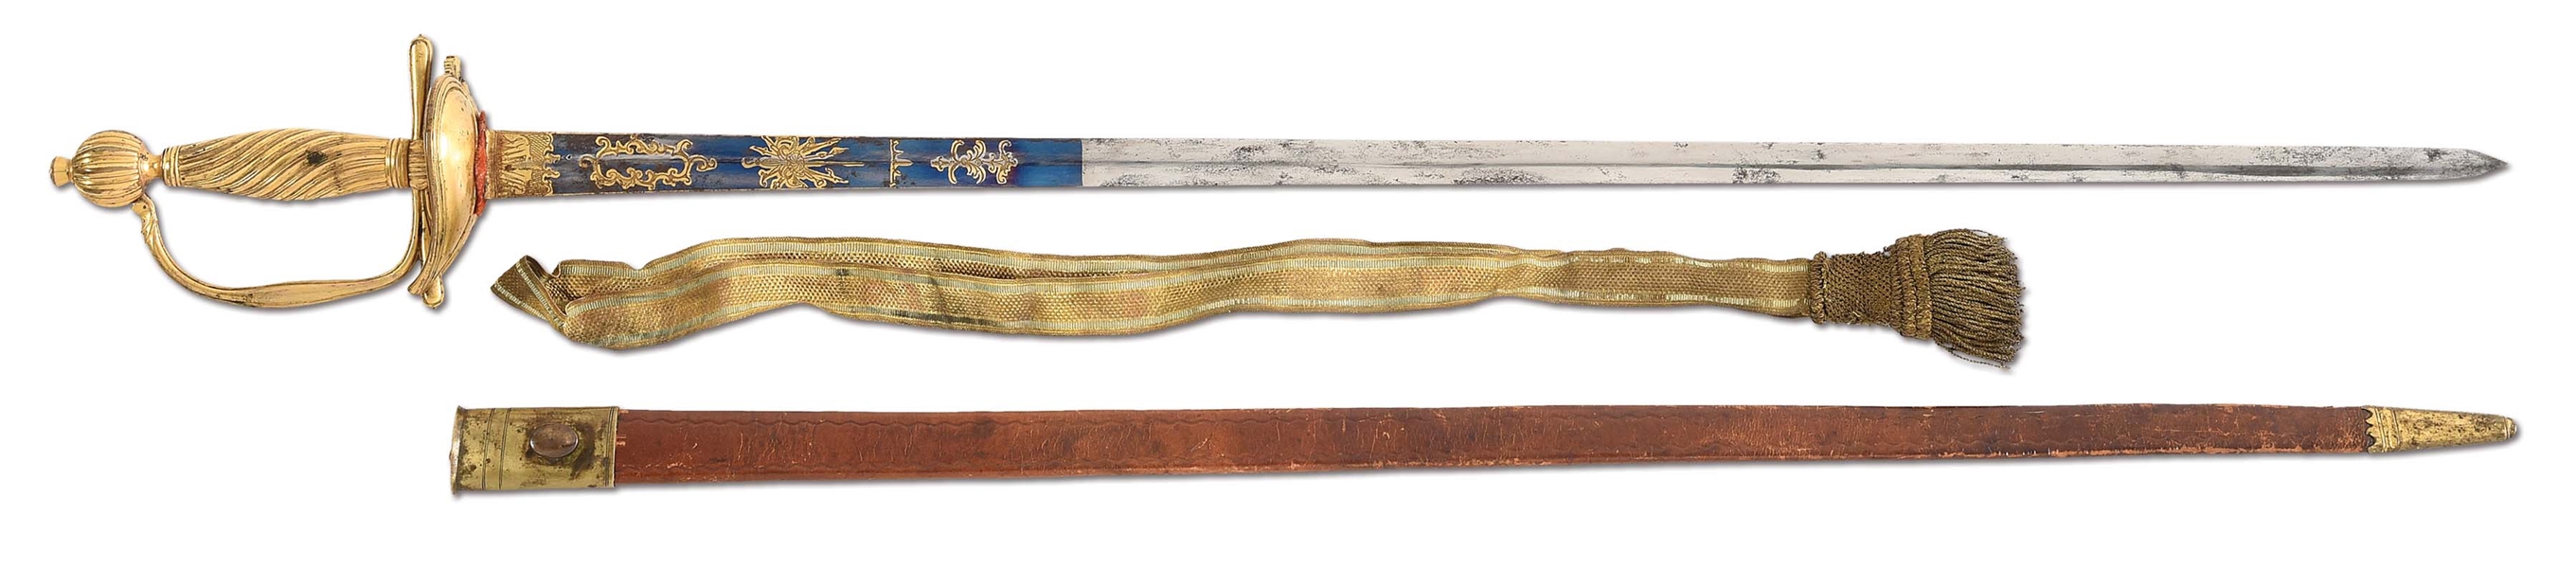 REVOLUTIONARY WAR ERA GILT OFFICERS SMALL SWORD WITH SCABBARD AND KNOT.